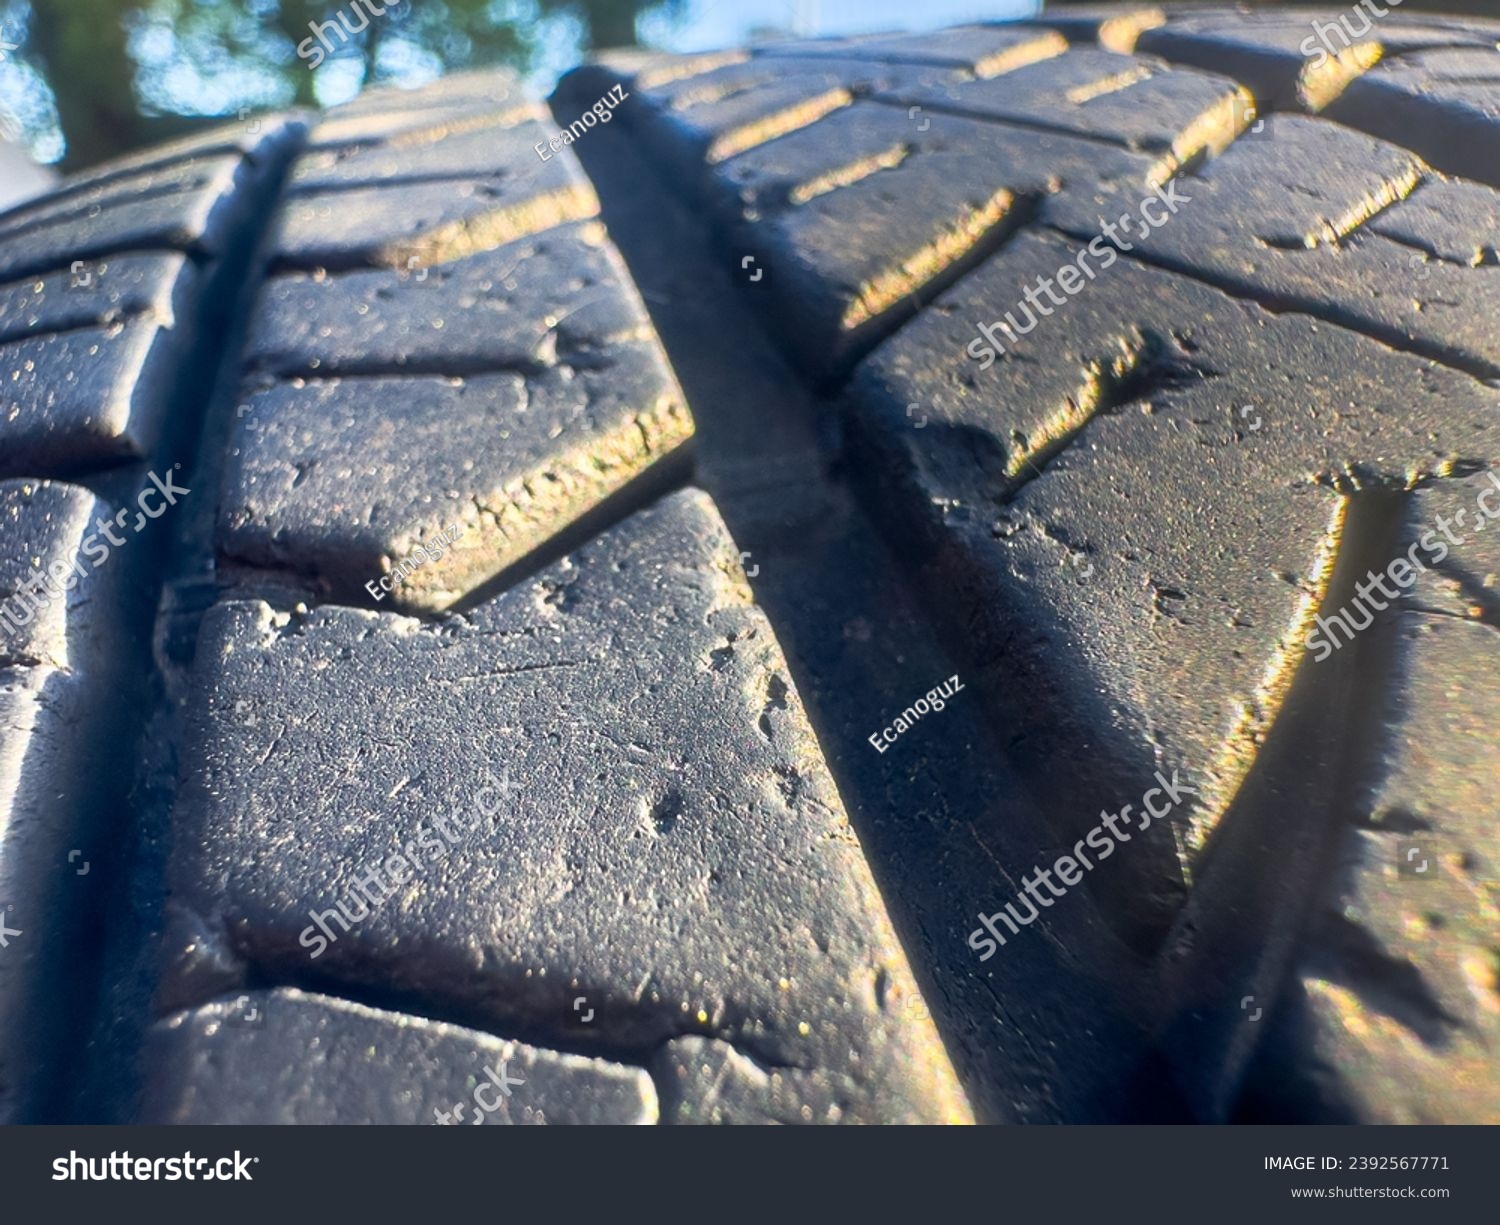 In this detailed close-up photograph, the intricate textures and patterns of a tire's rubber surface come into focus. #2392567771